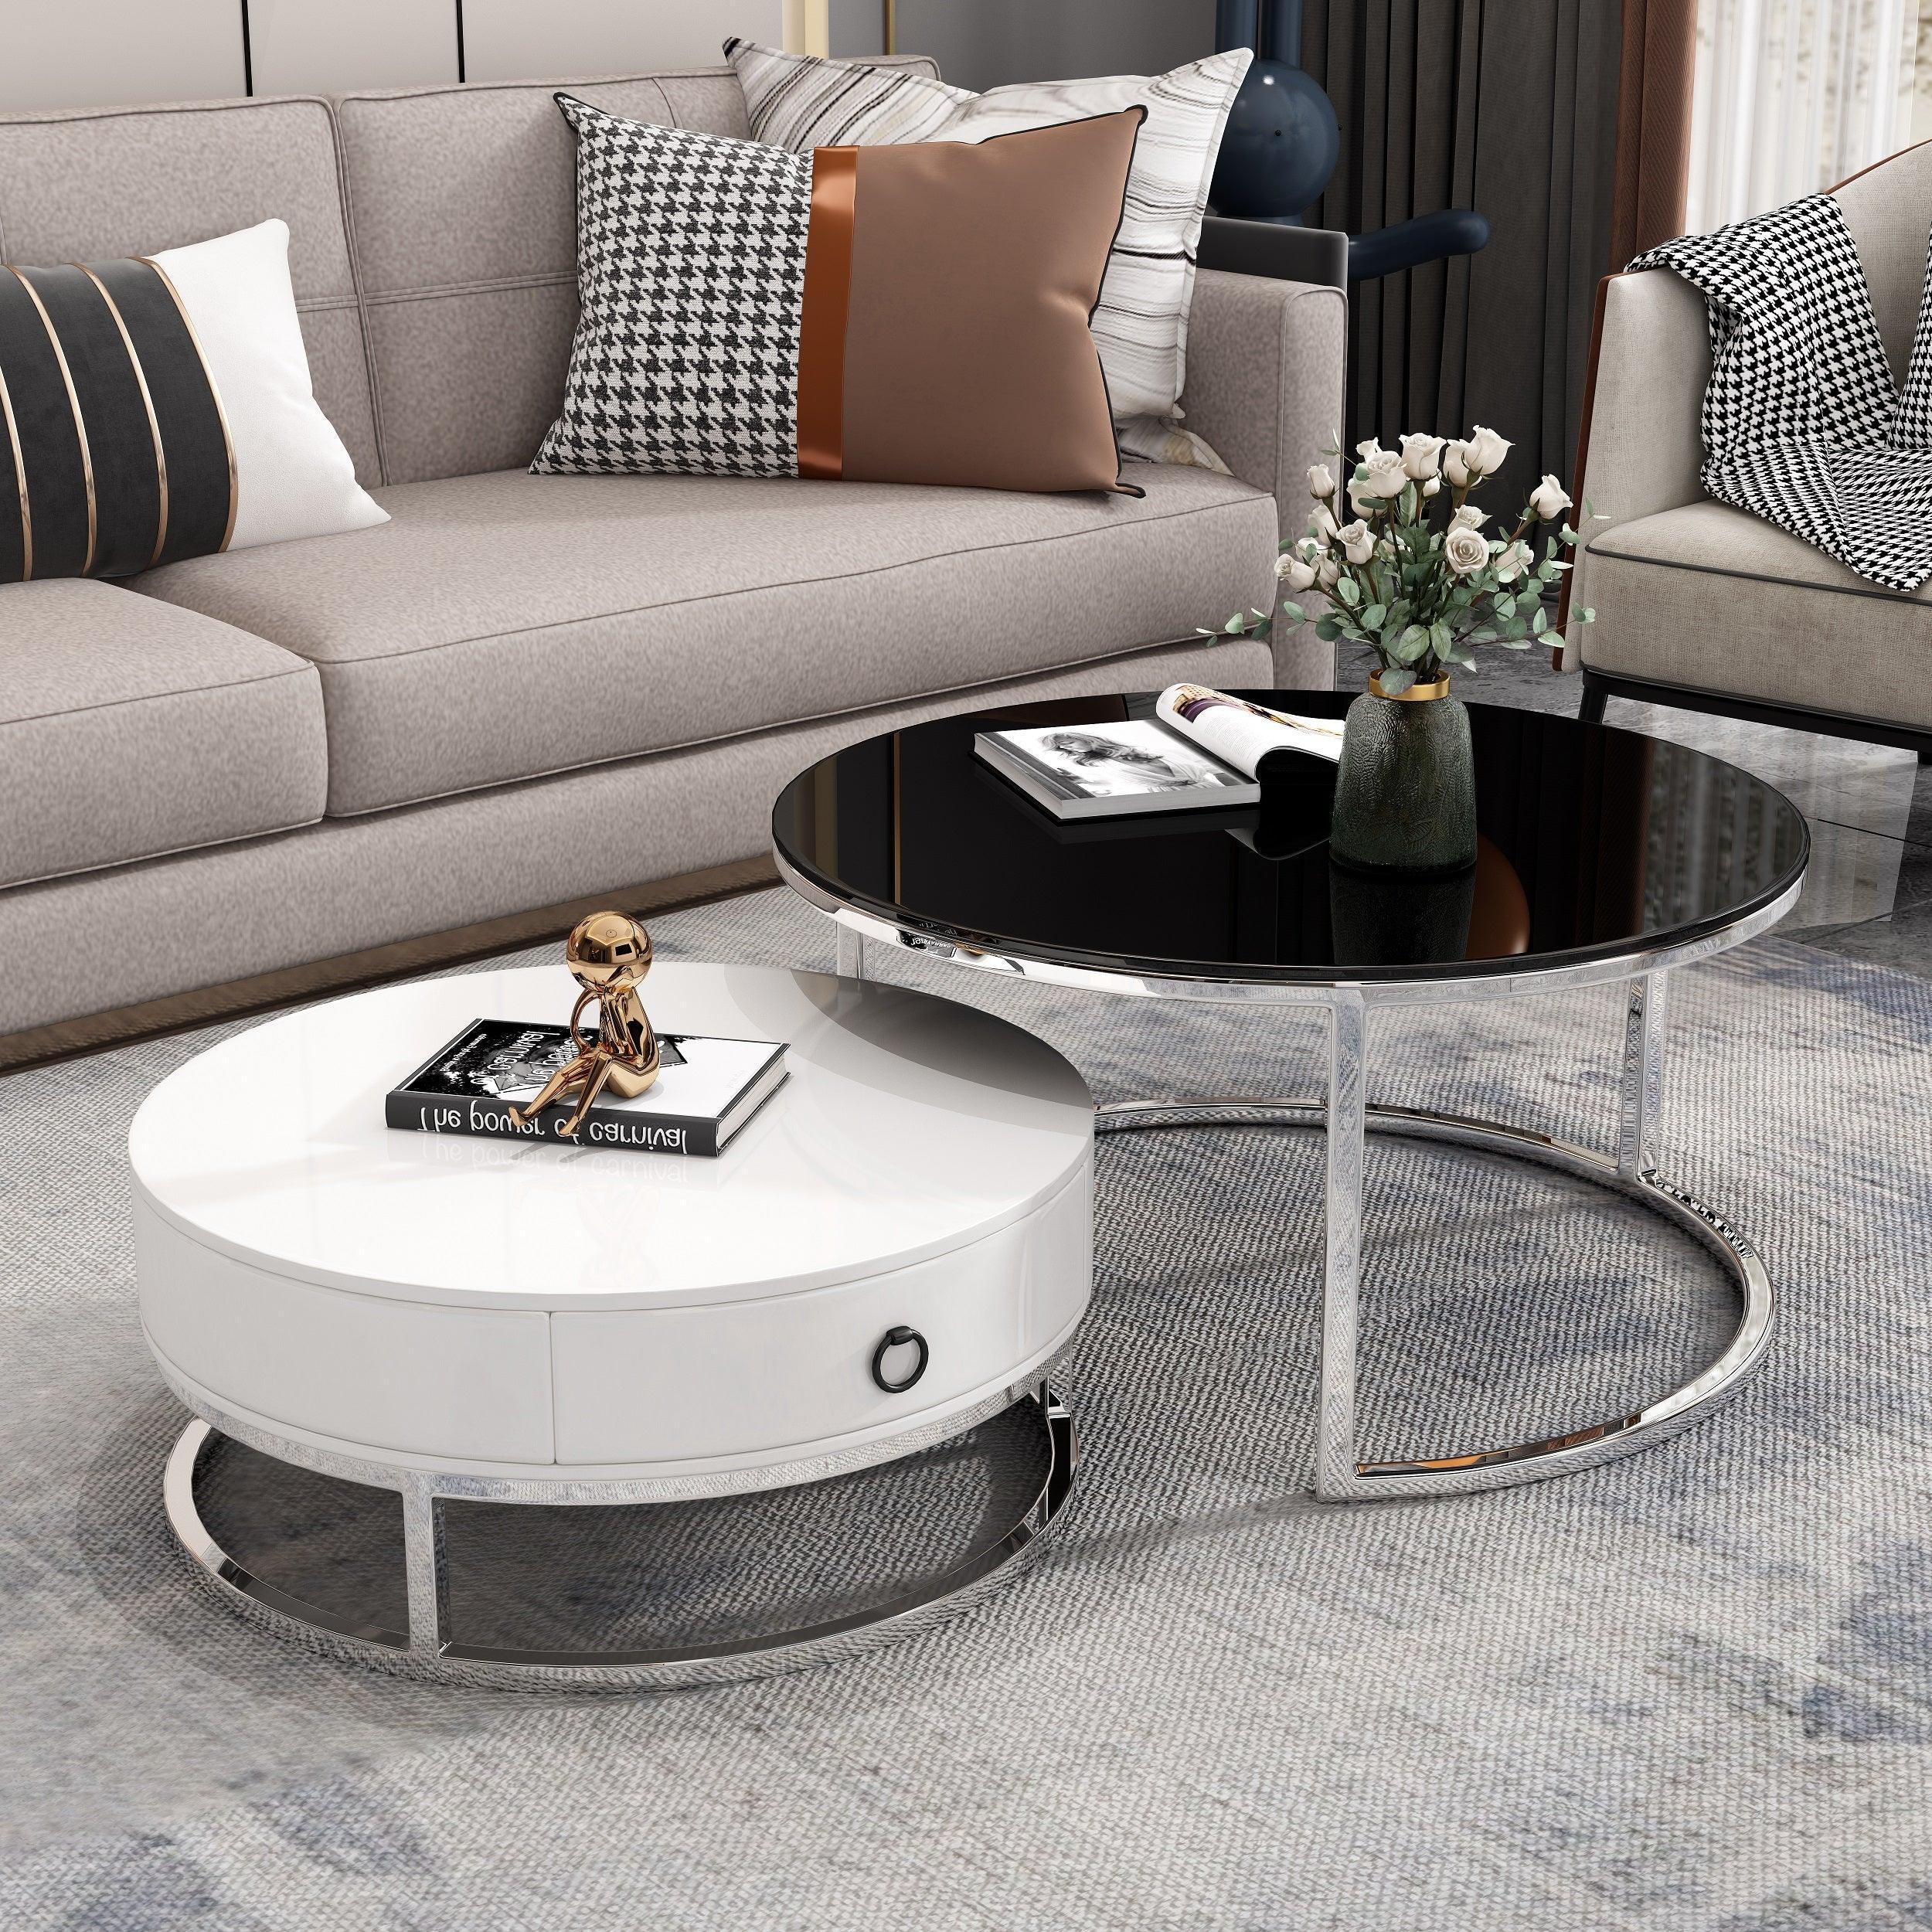 Image of The A2Z Furniture's Dodo Coffee Table set in white with silver accents and black tempered glass. The set includes a larger round table and a smaller nesting table with a storage drawer